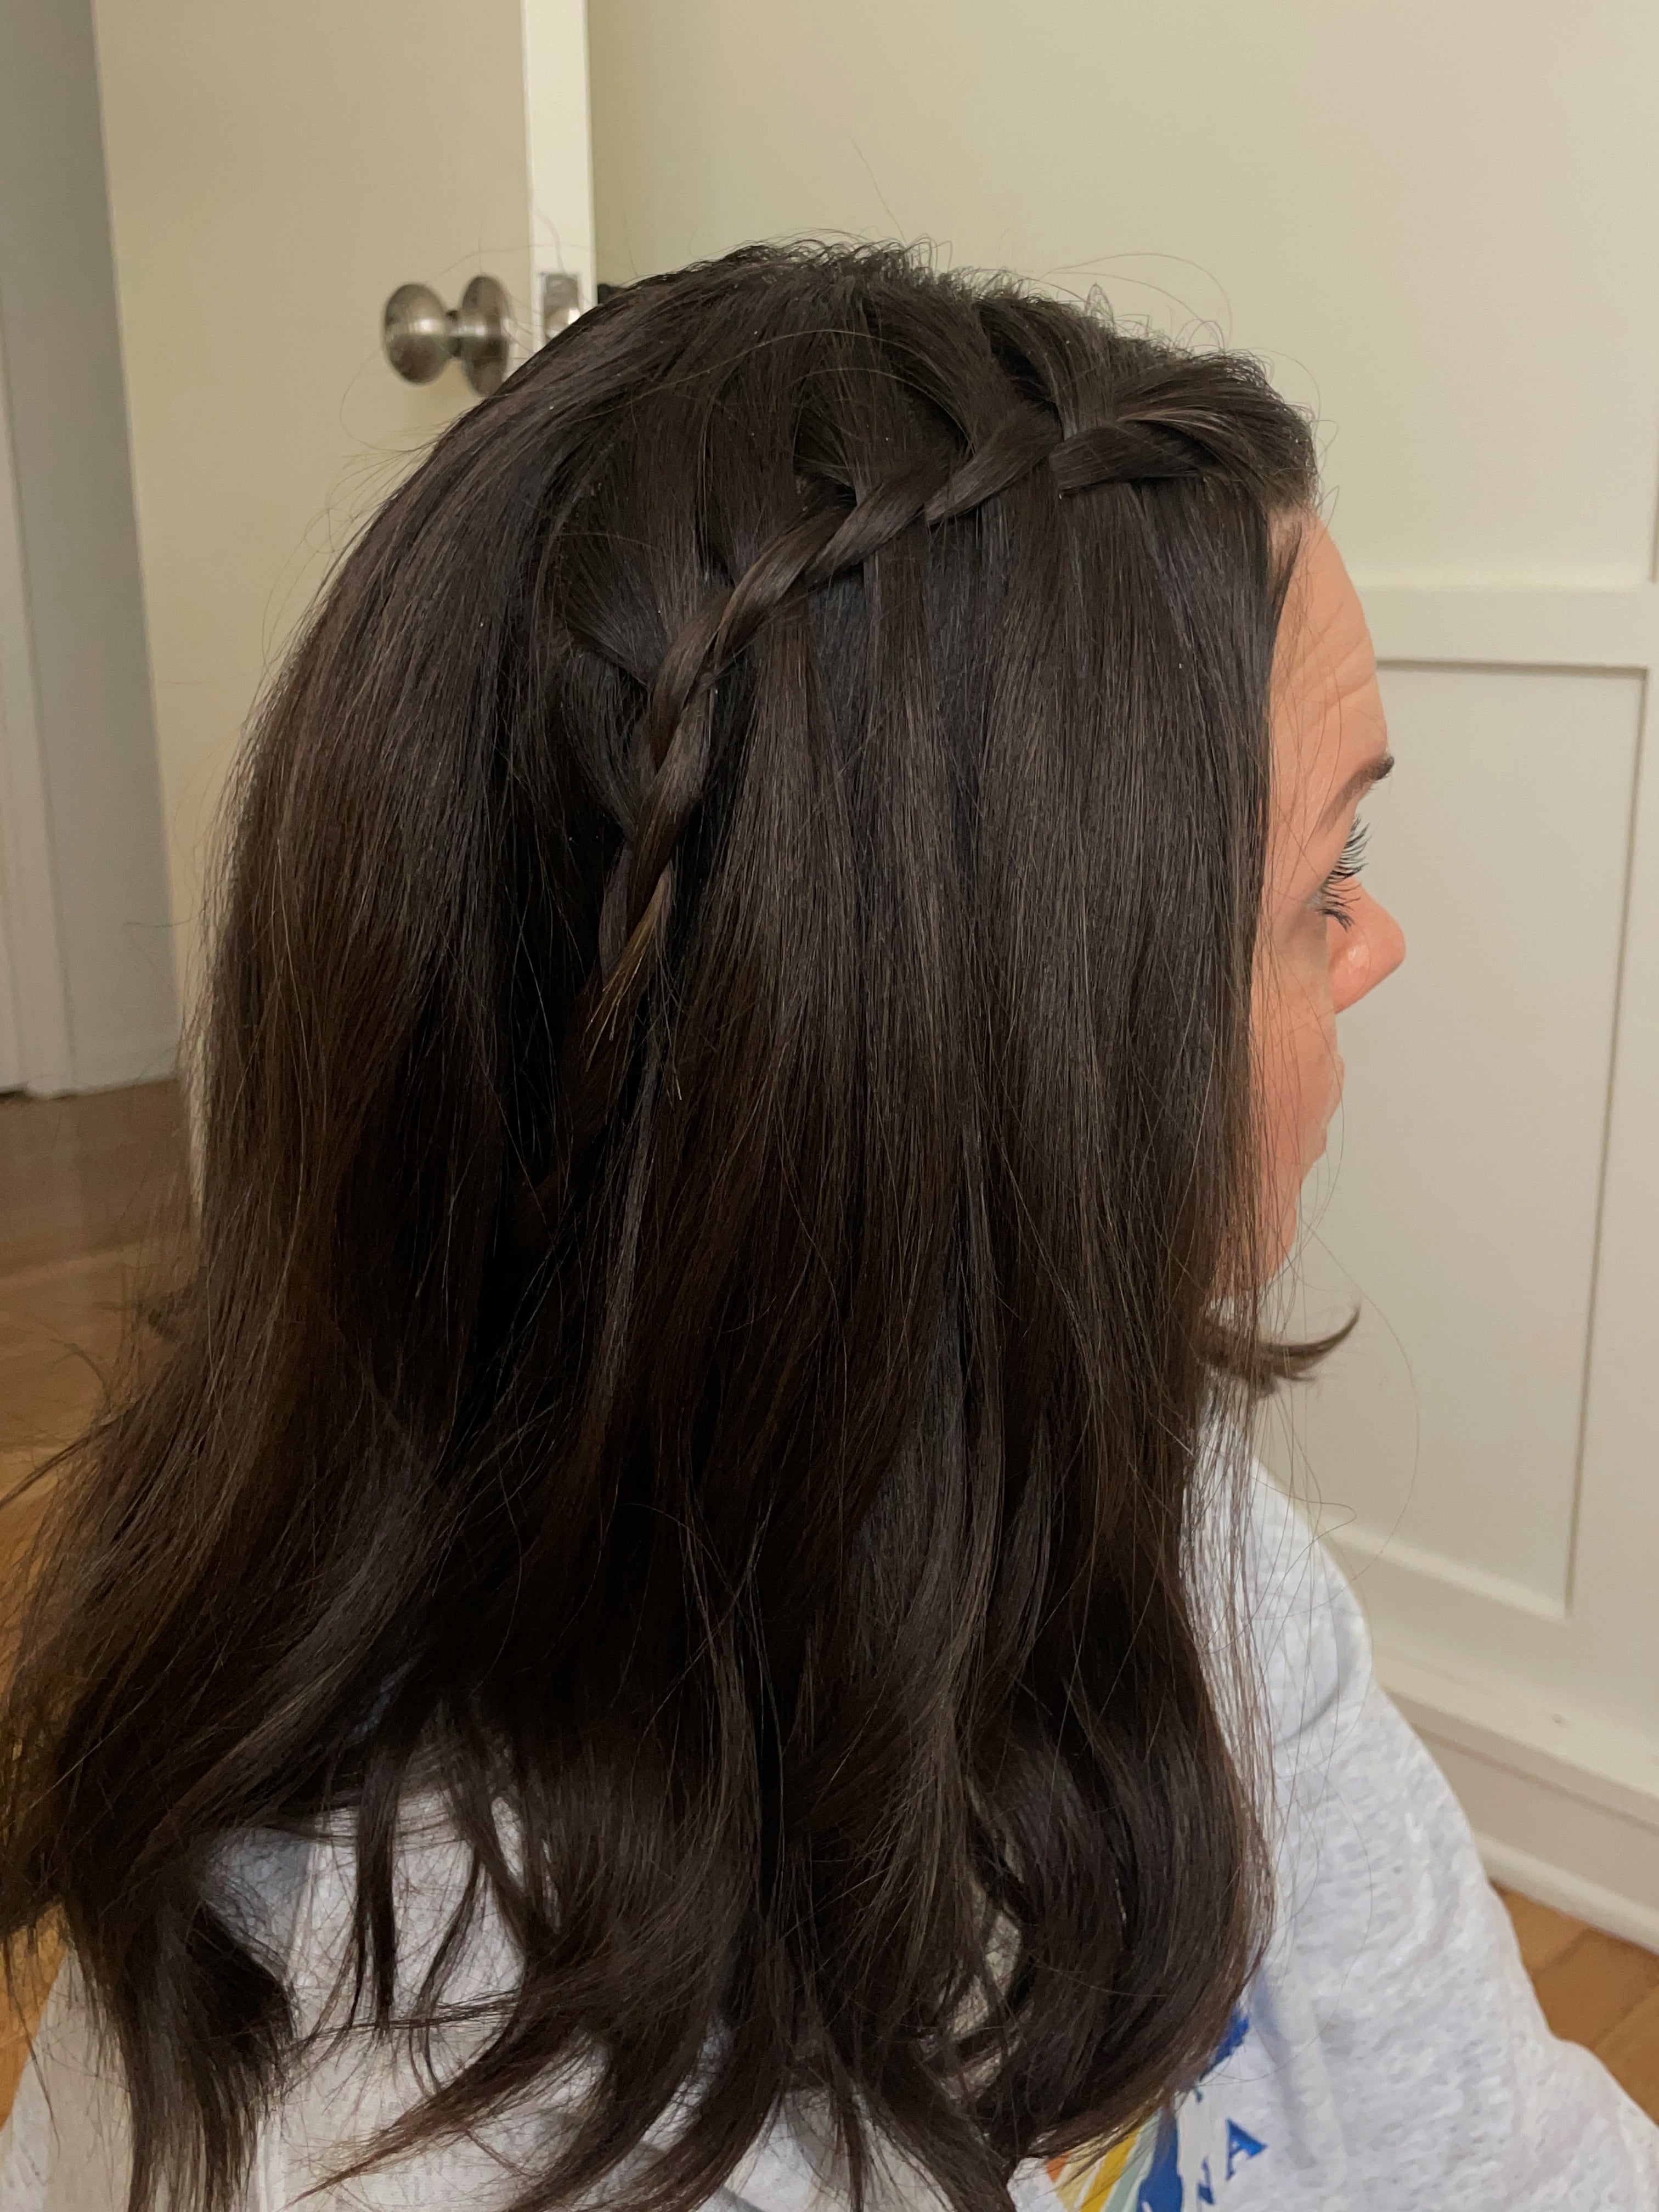 10 SIMPLE and BEAUTIFUL hairstyles for every day! Easy braided